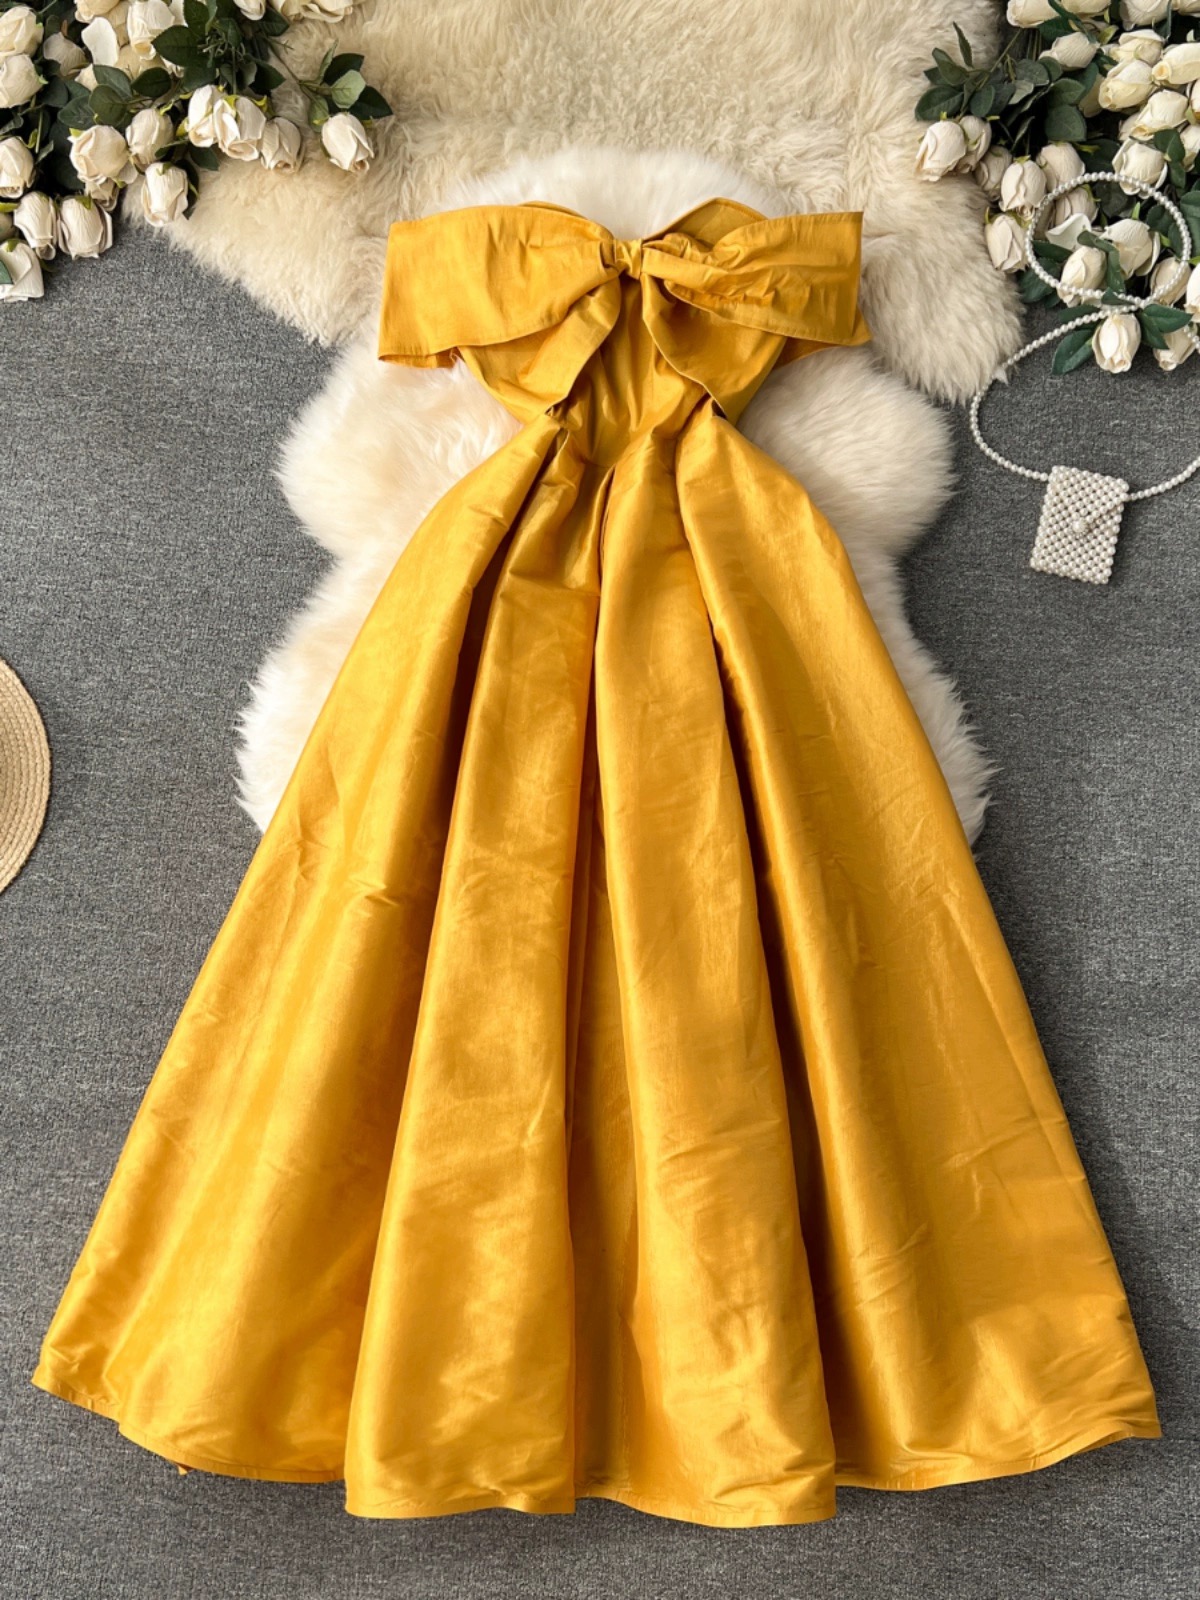 Yellow Homecoming Dress, Strapless Party Dress,chic Bridesmaid Dress With Bow